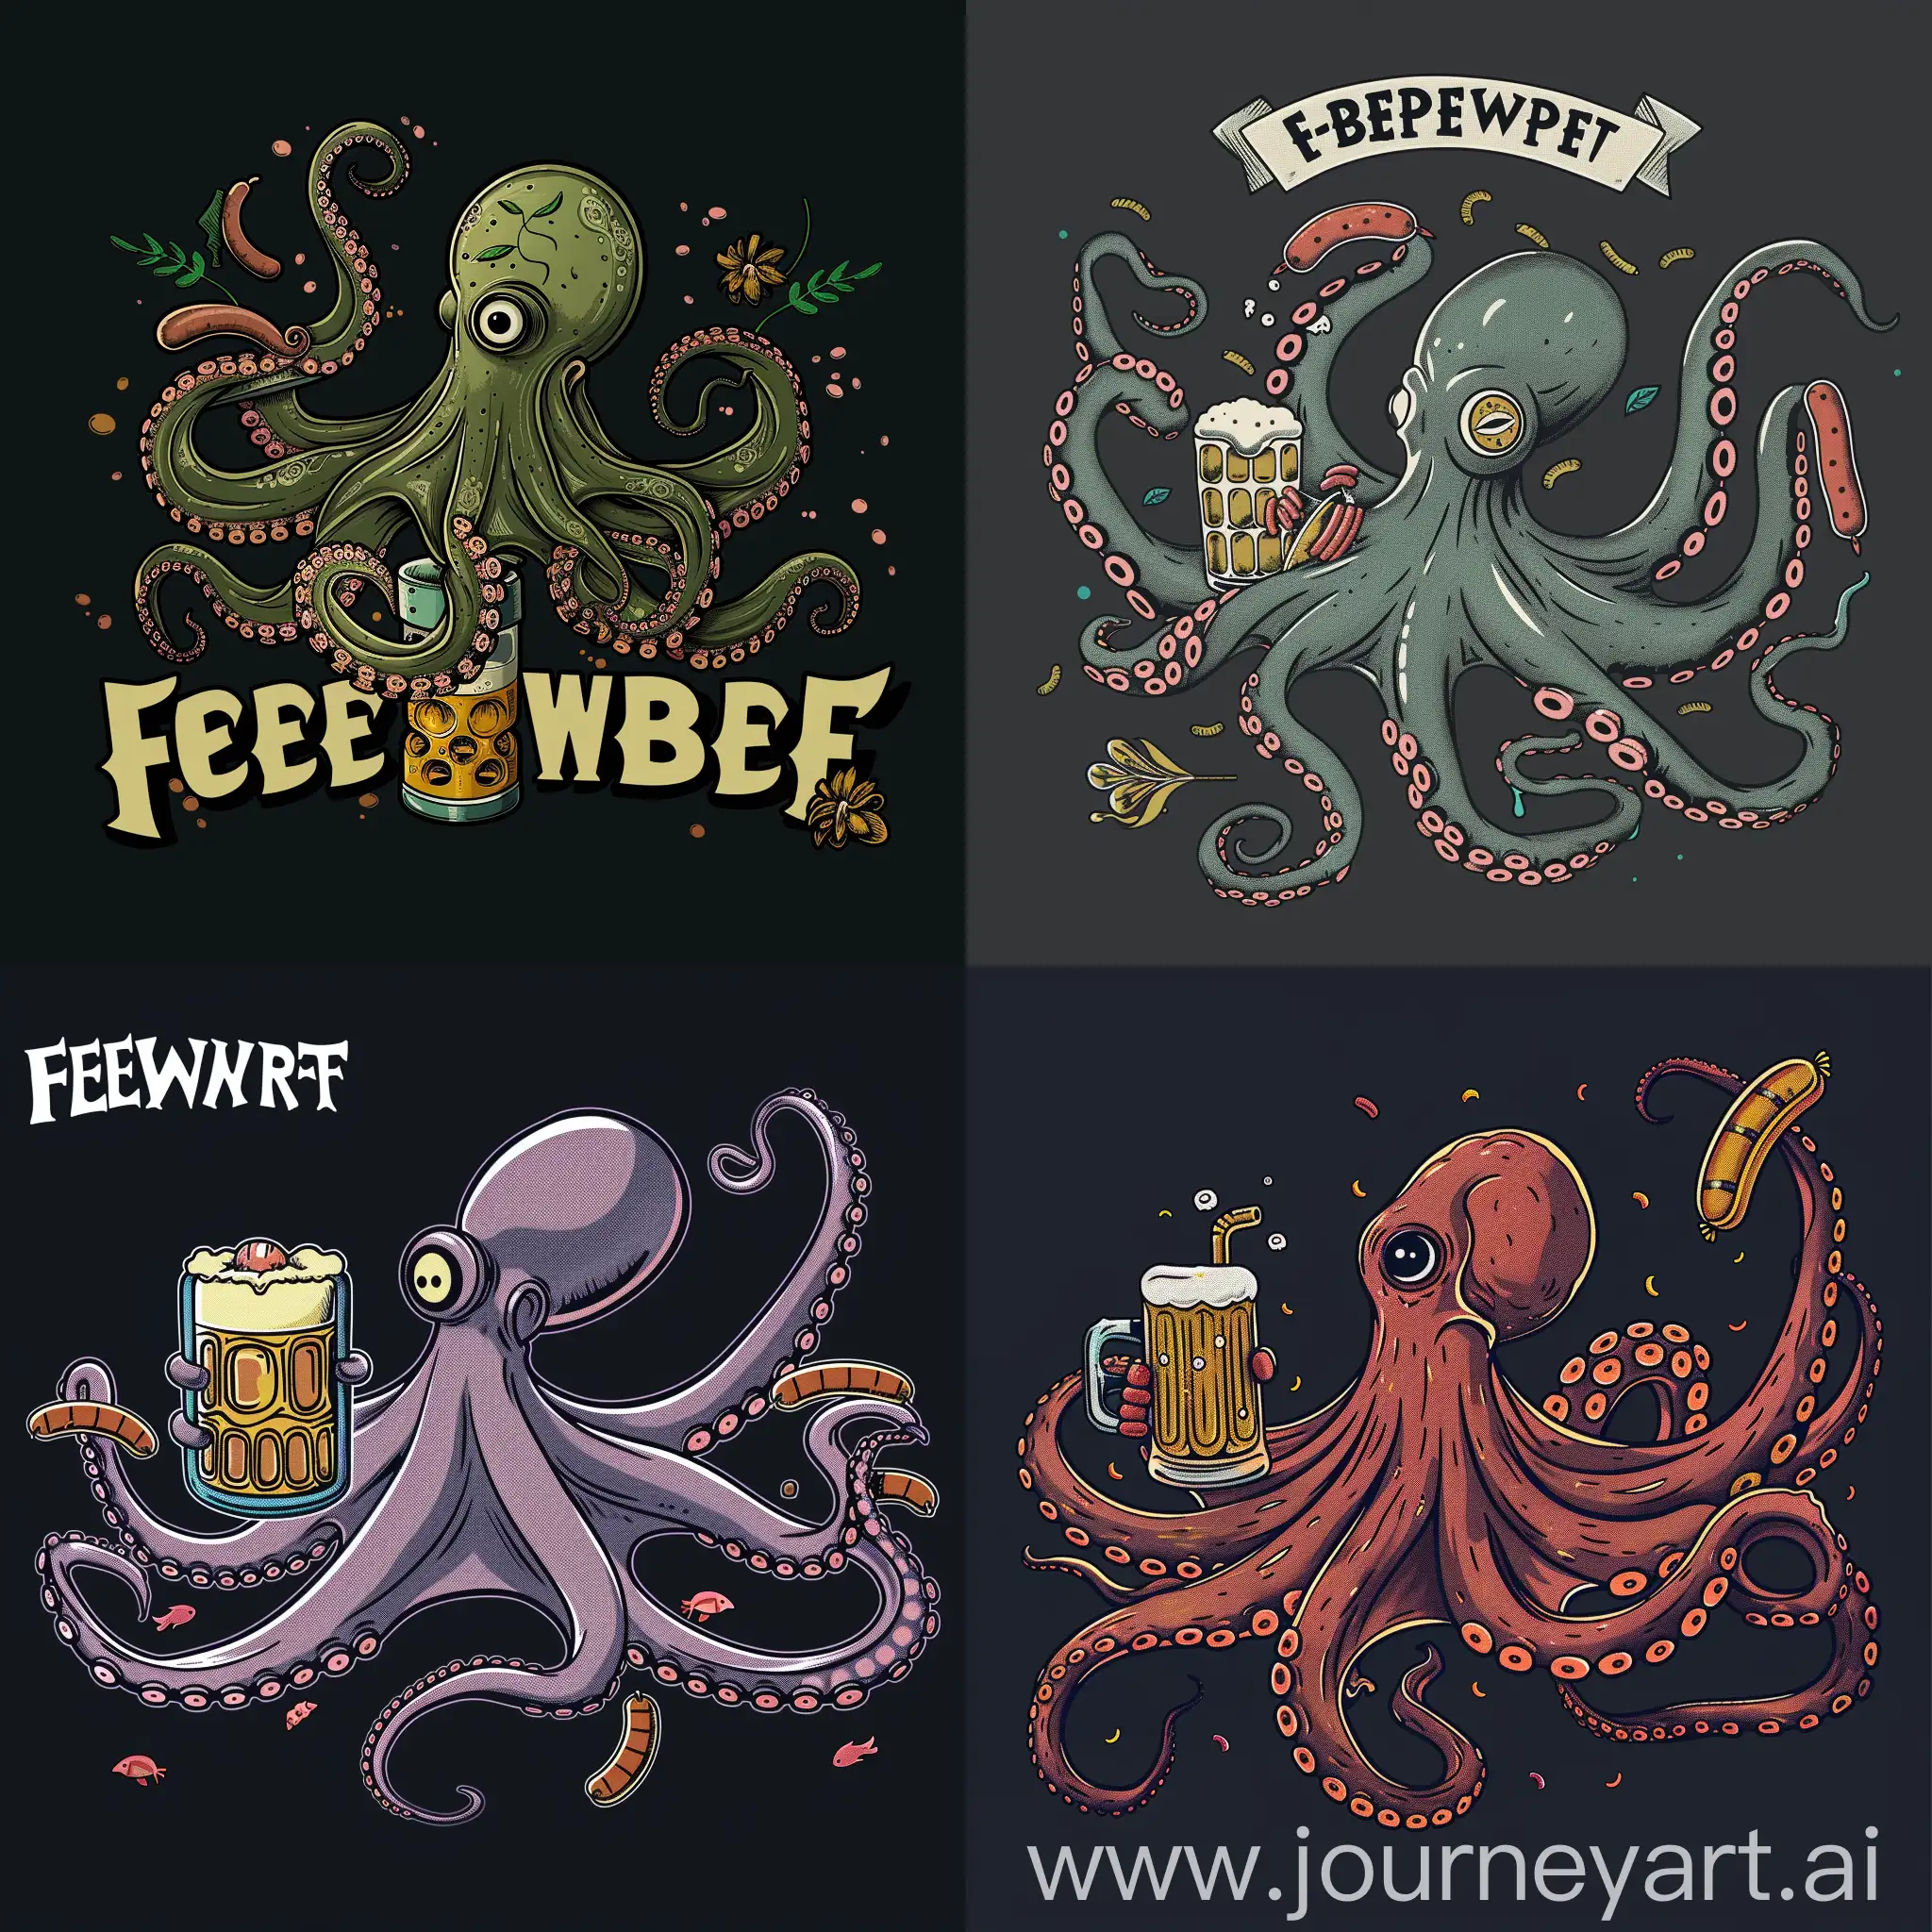 FeBREWaryfest logo of a one-eyed octopus drinking beer and eating sausages